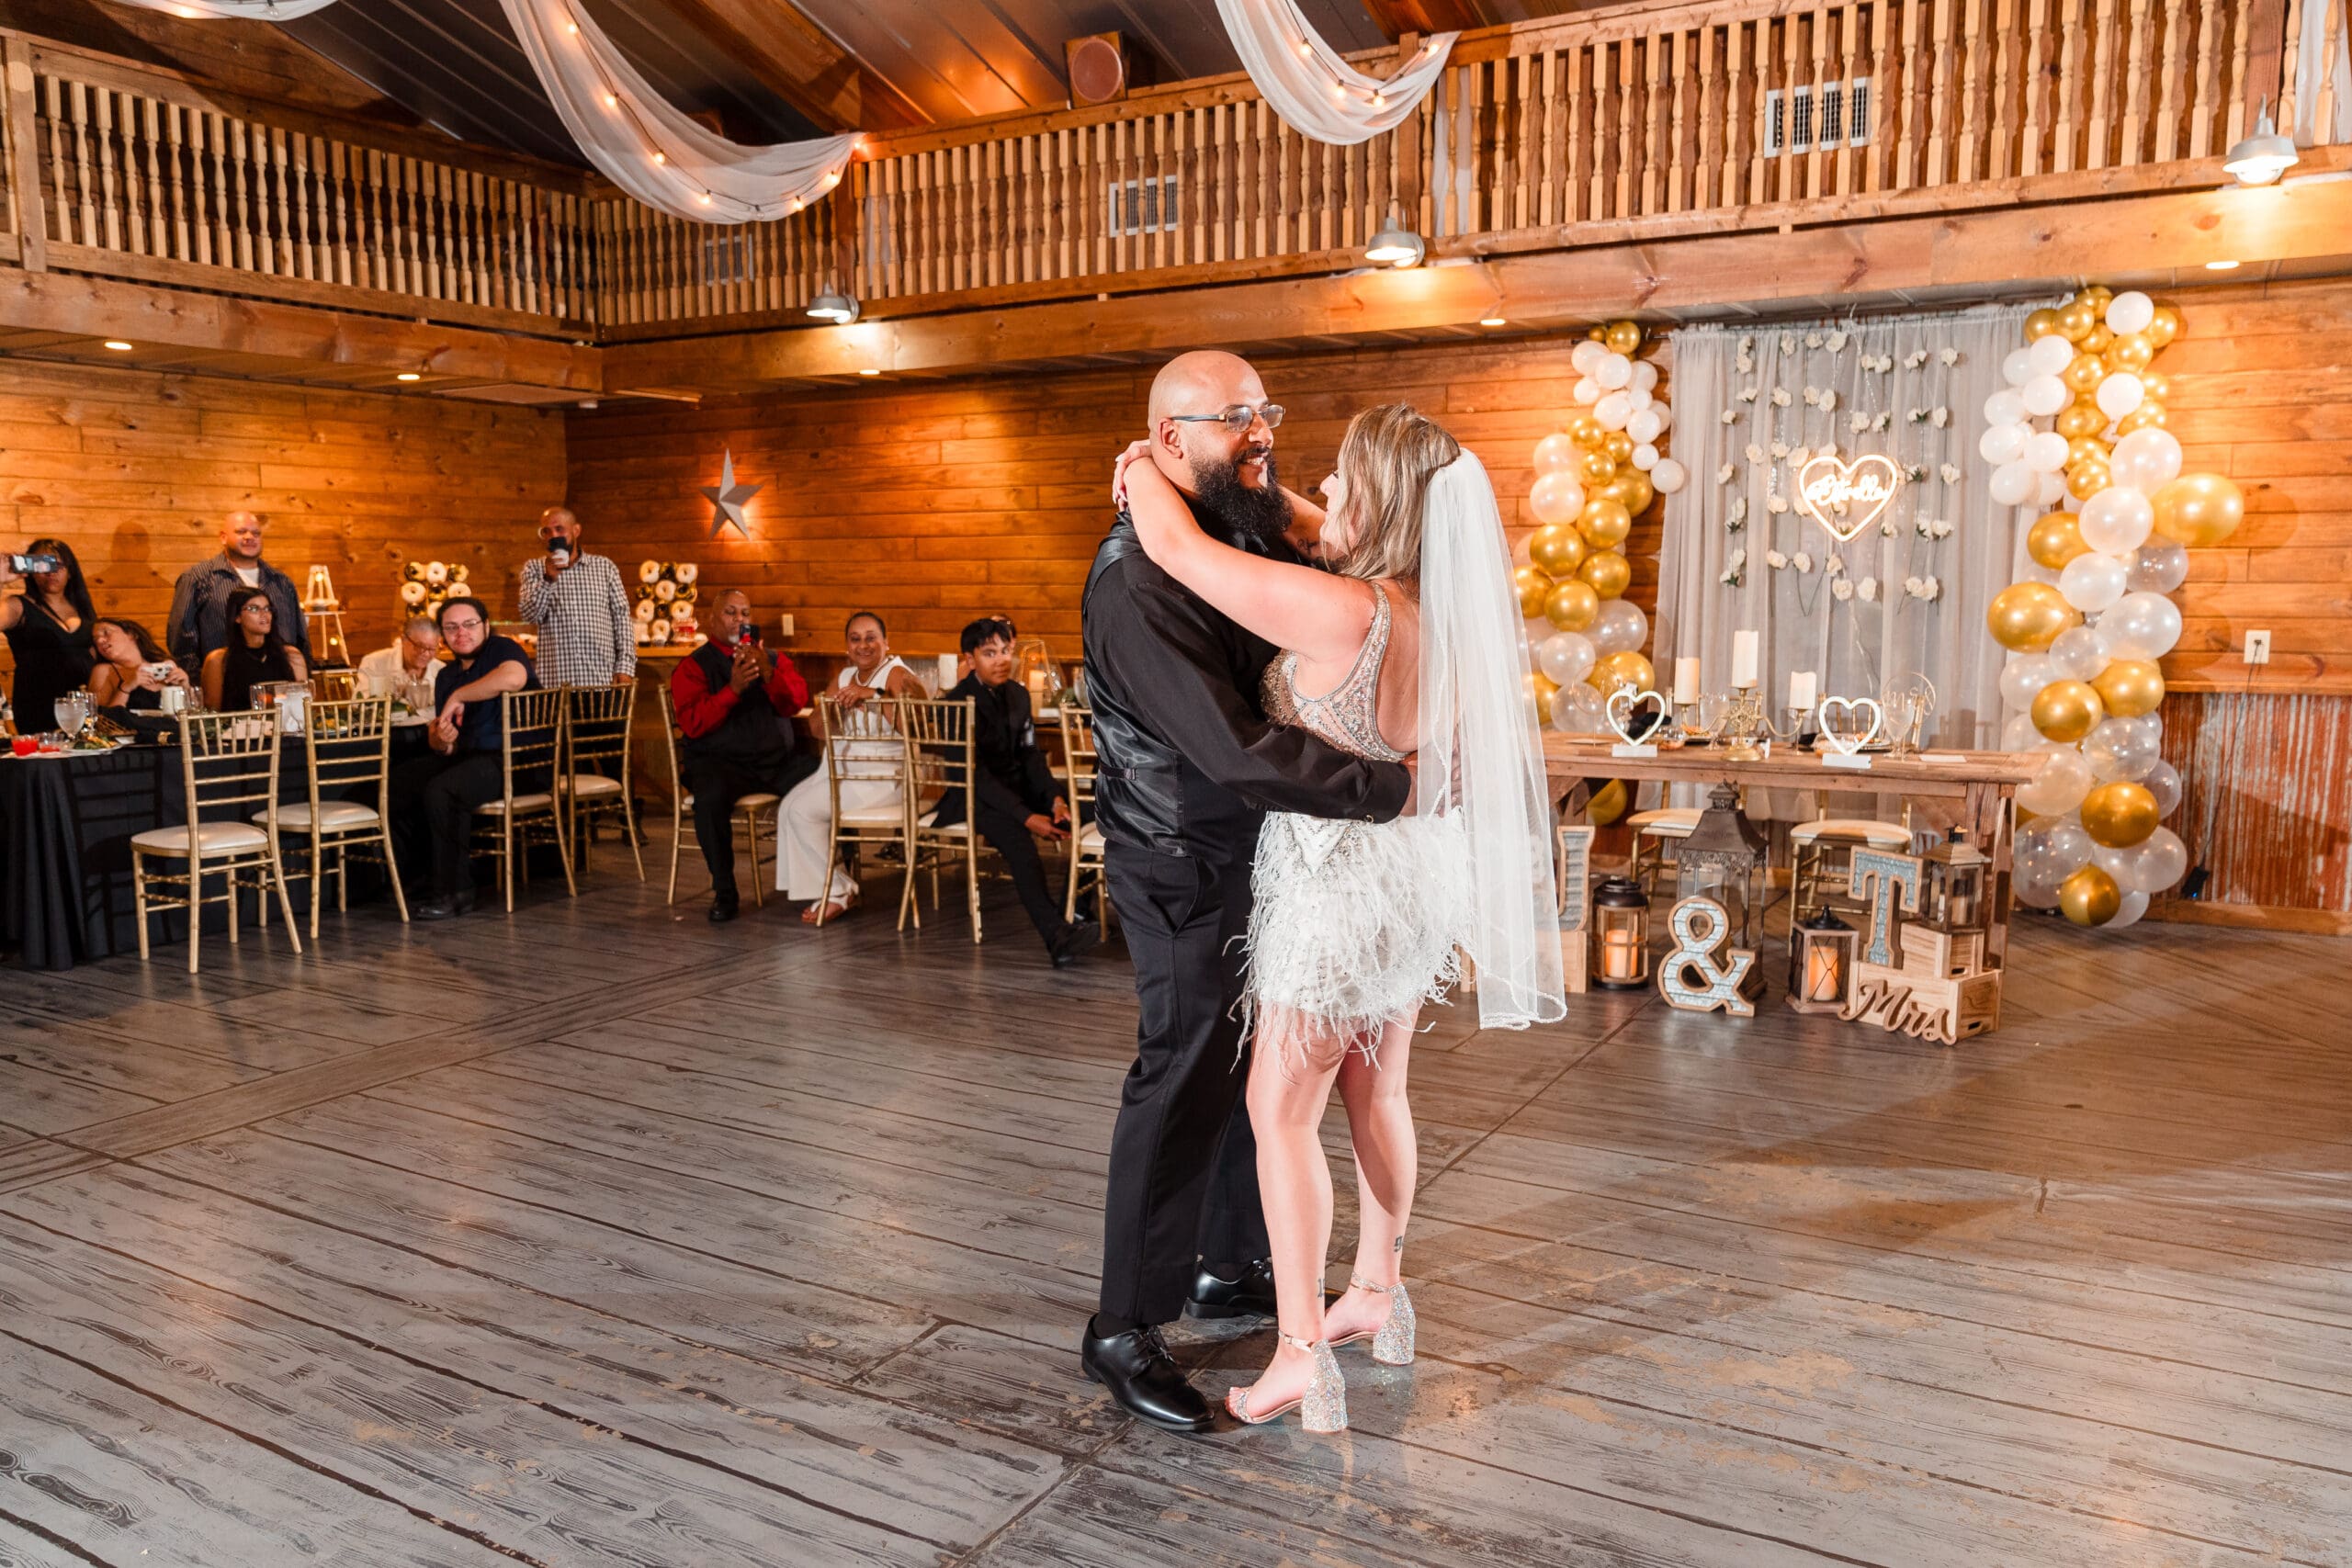 Taylor and David sharing their first dance as a married couple, gazing into each other's eyes, surrounded by elegant decorations at the Hidden Barn